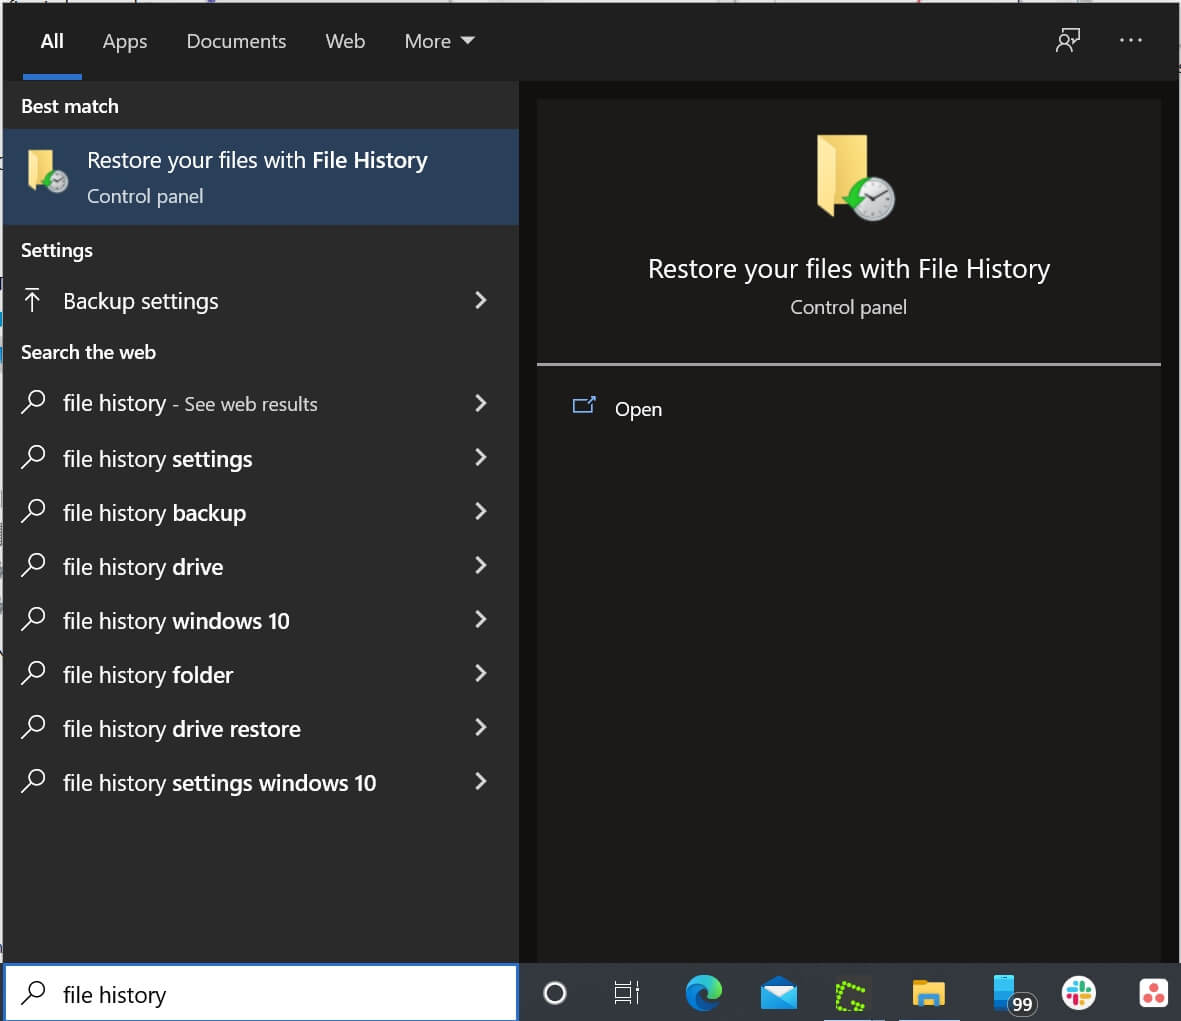 Search results after typing "file history" in the Start menu search bar.